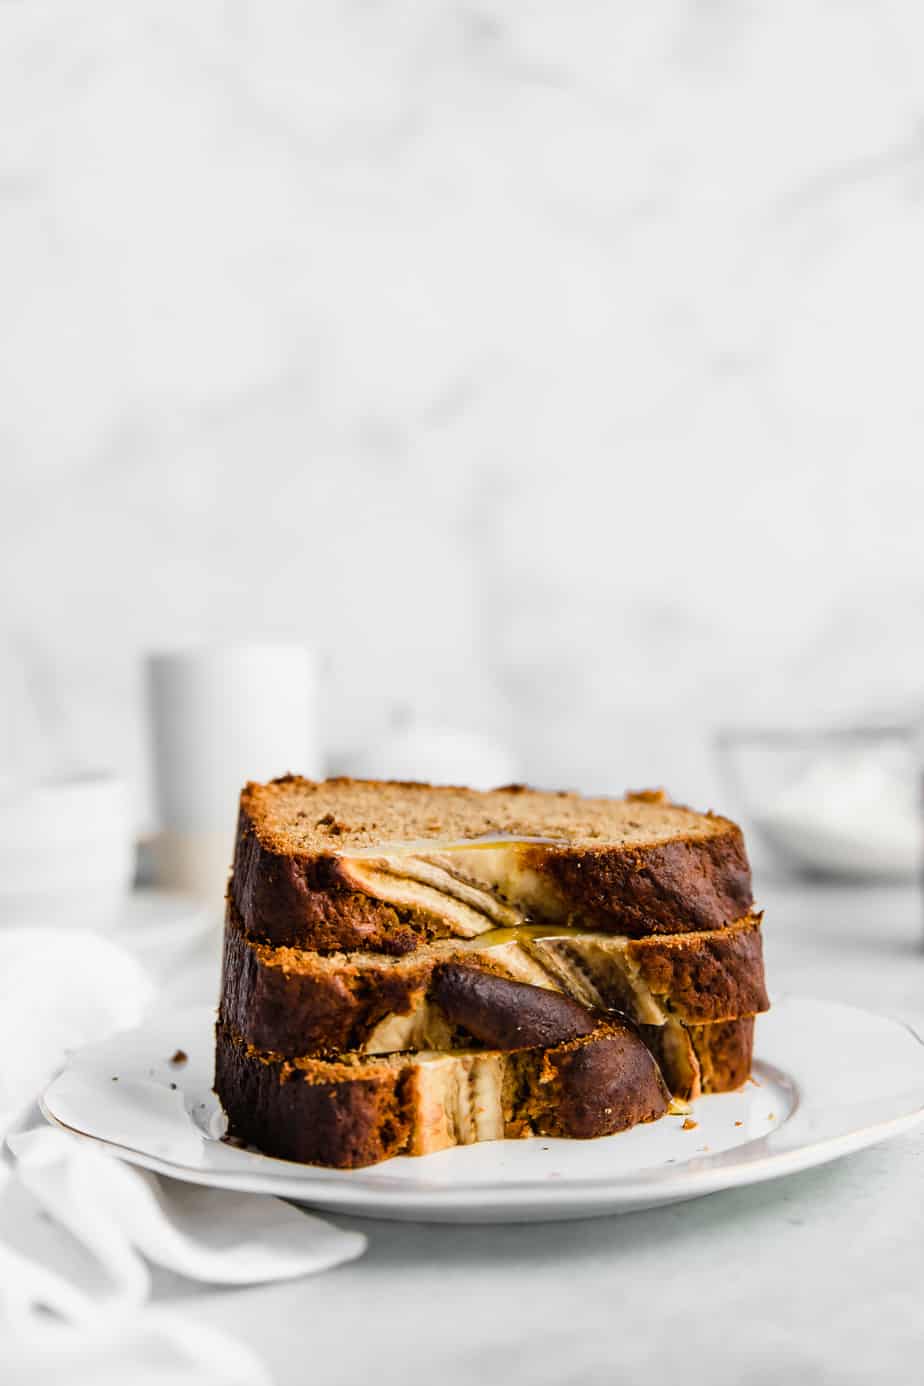 Thick slices of banana bread stacked on a white plate.